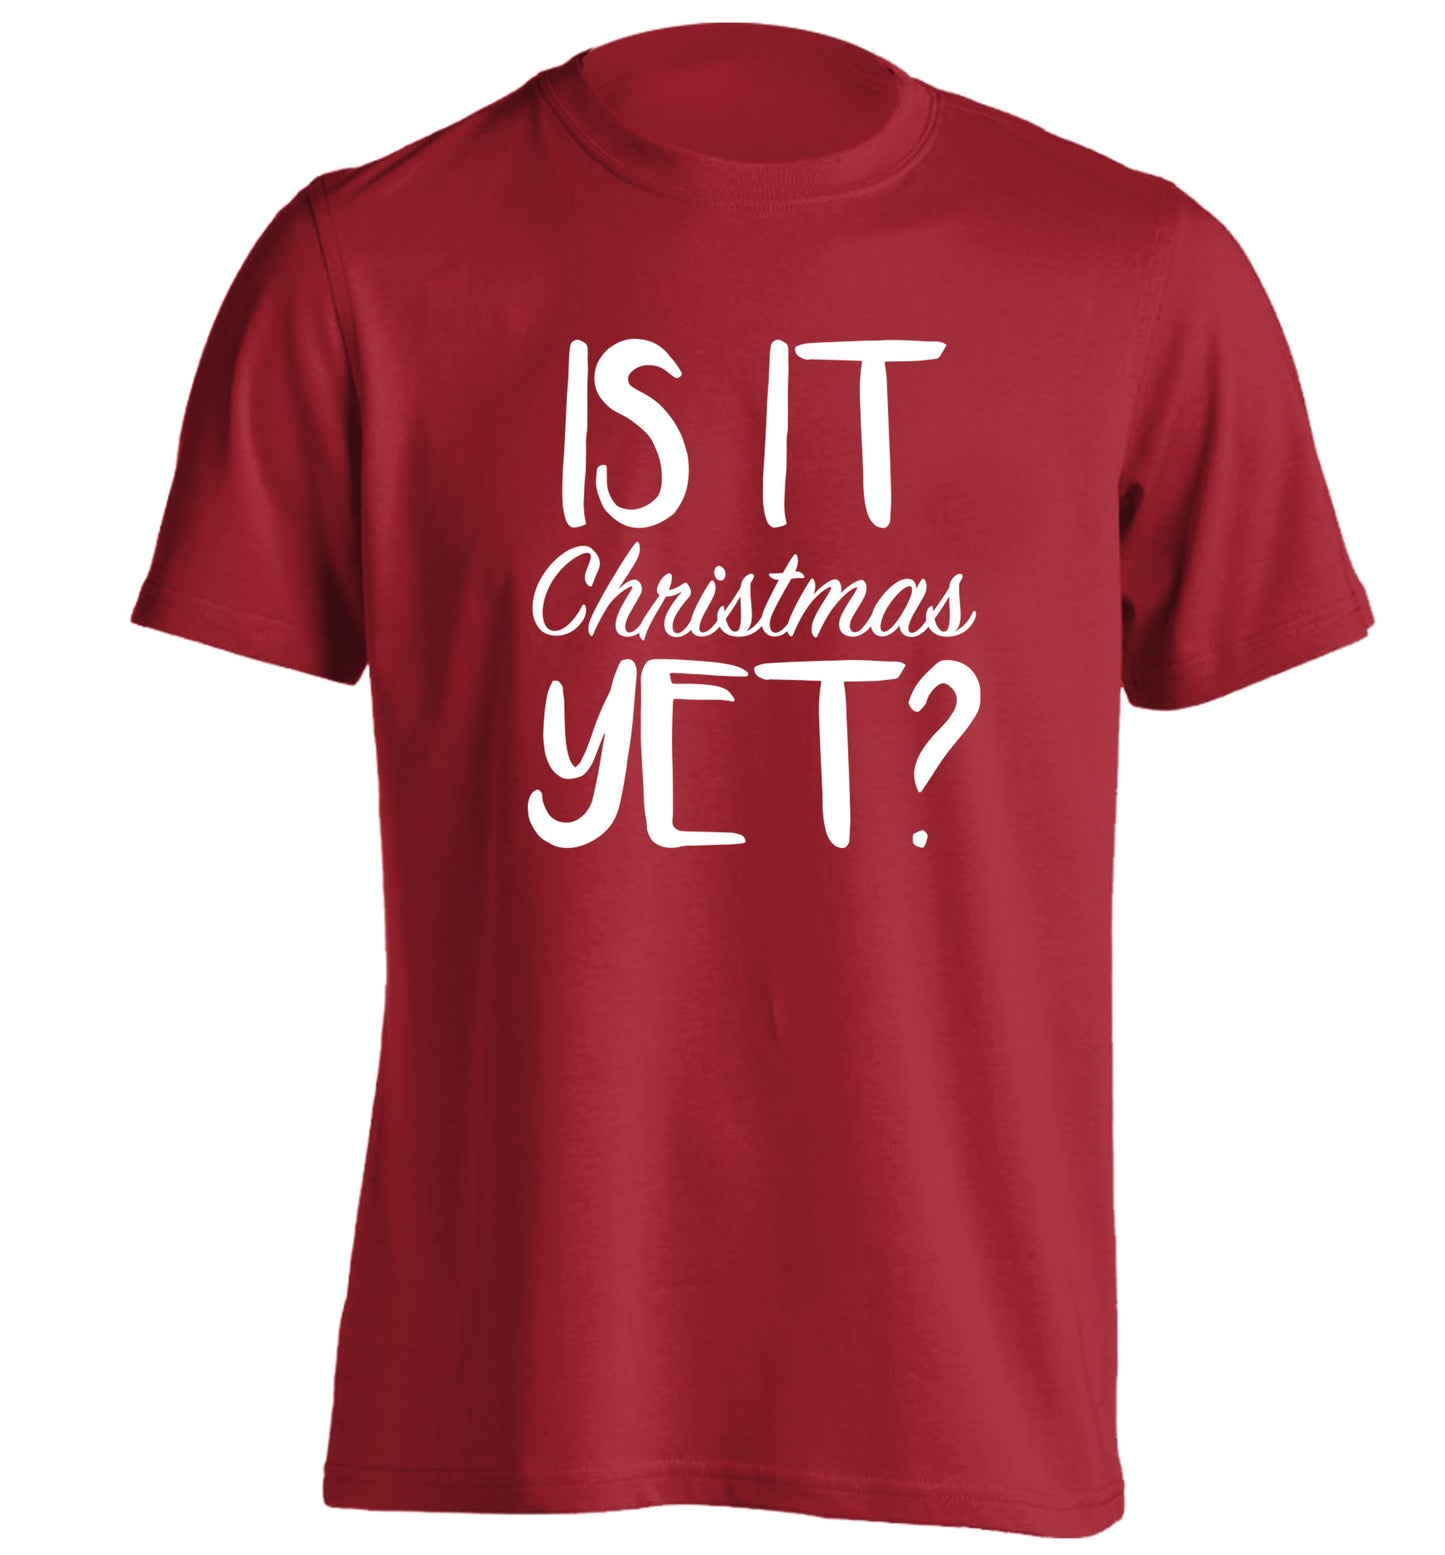 Is it Christmas yet? adults unisex red Tshirt 2XL